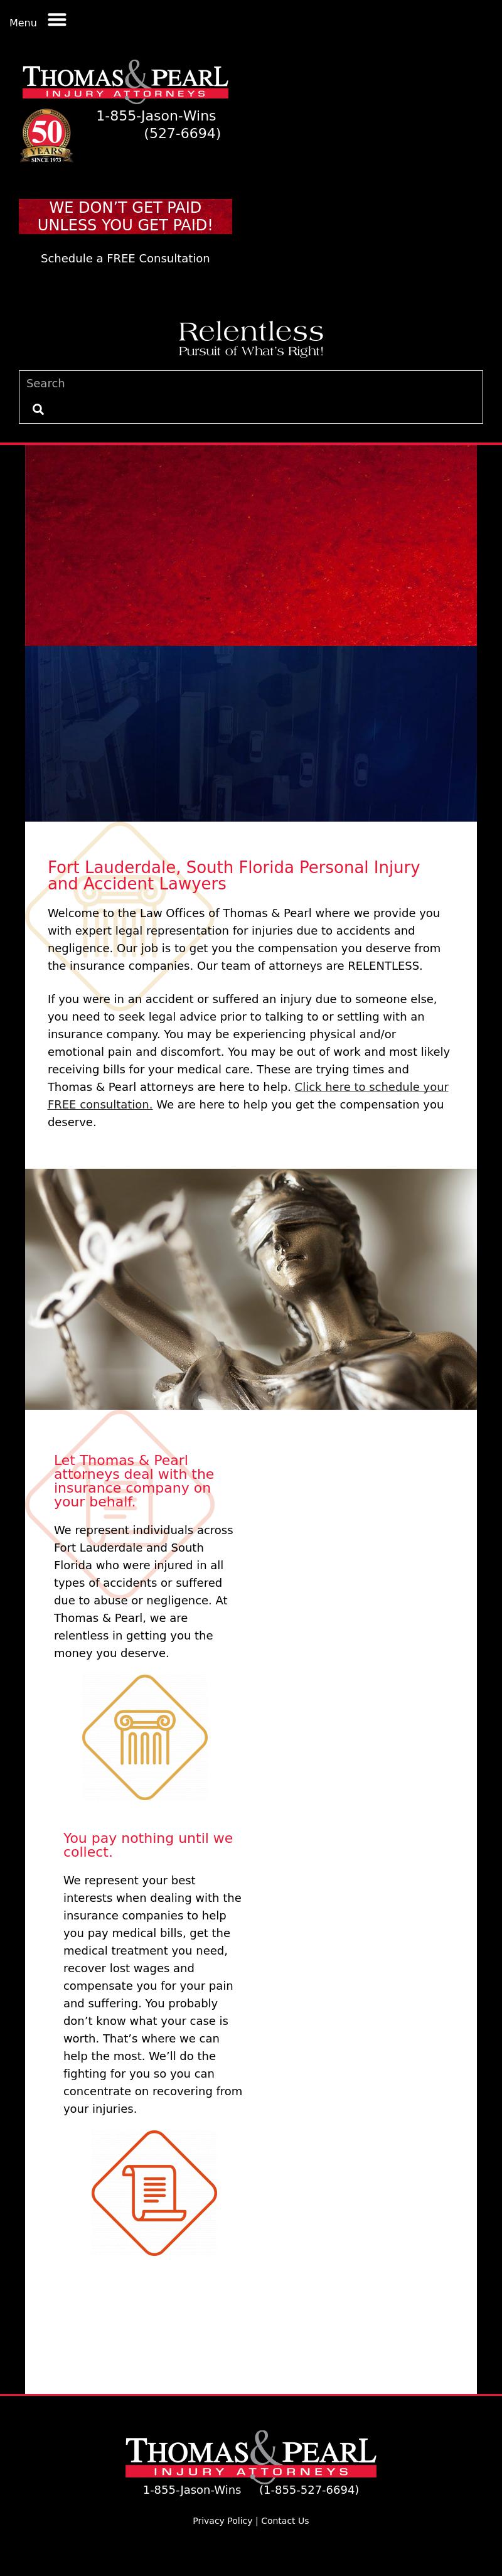 Thomas & Pearl PA - Fort Lauderdale FL Lawyers